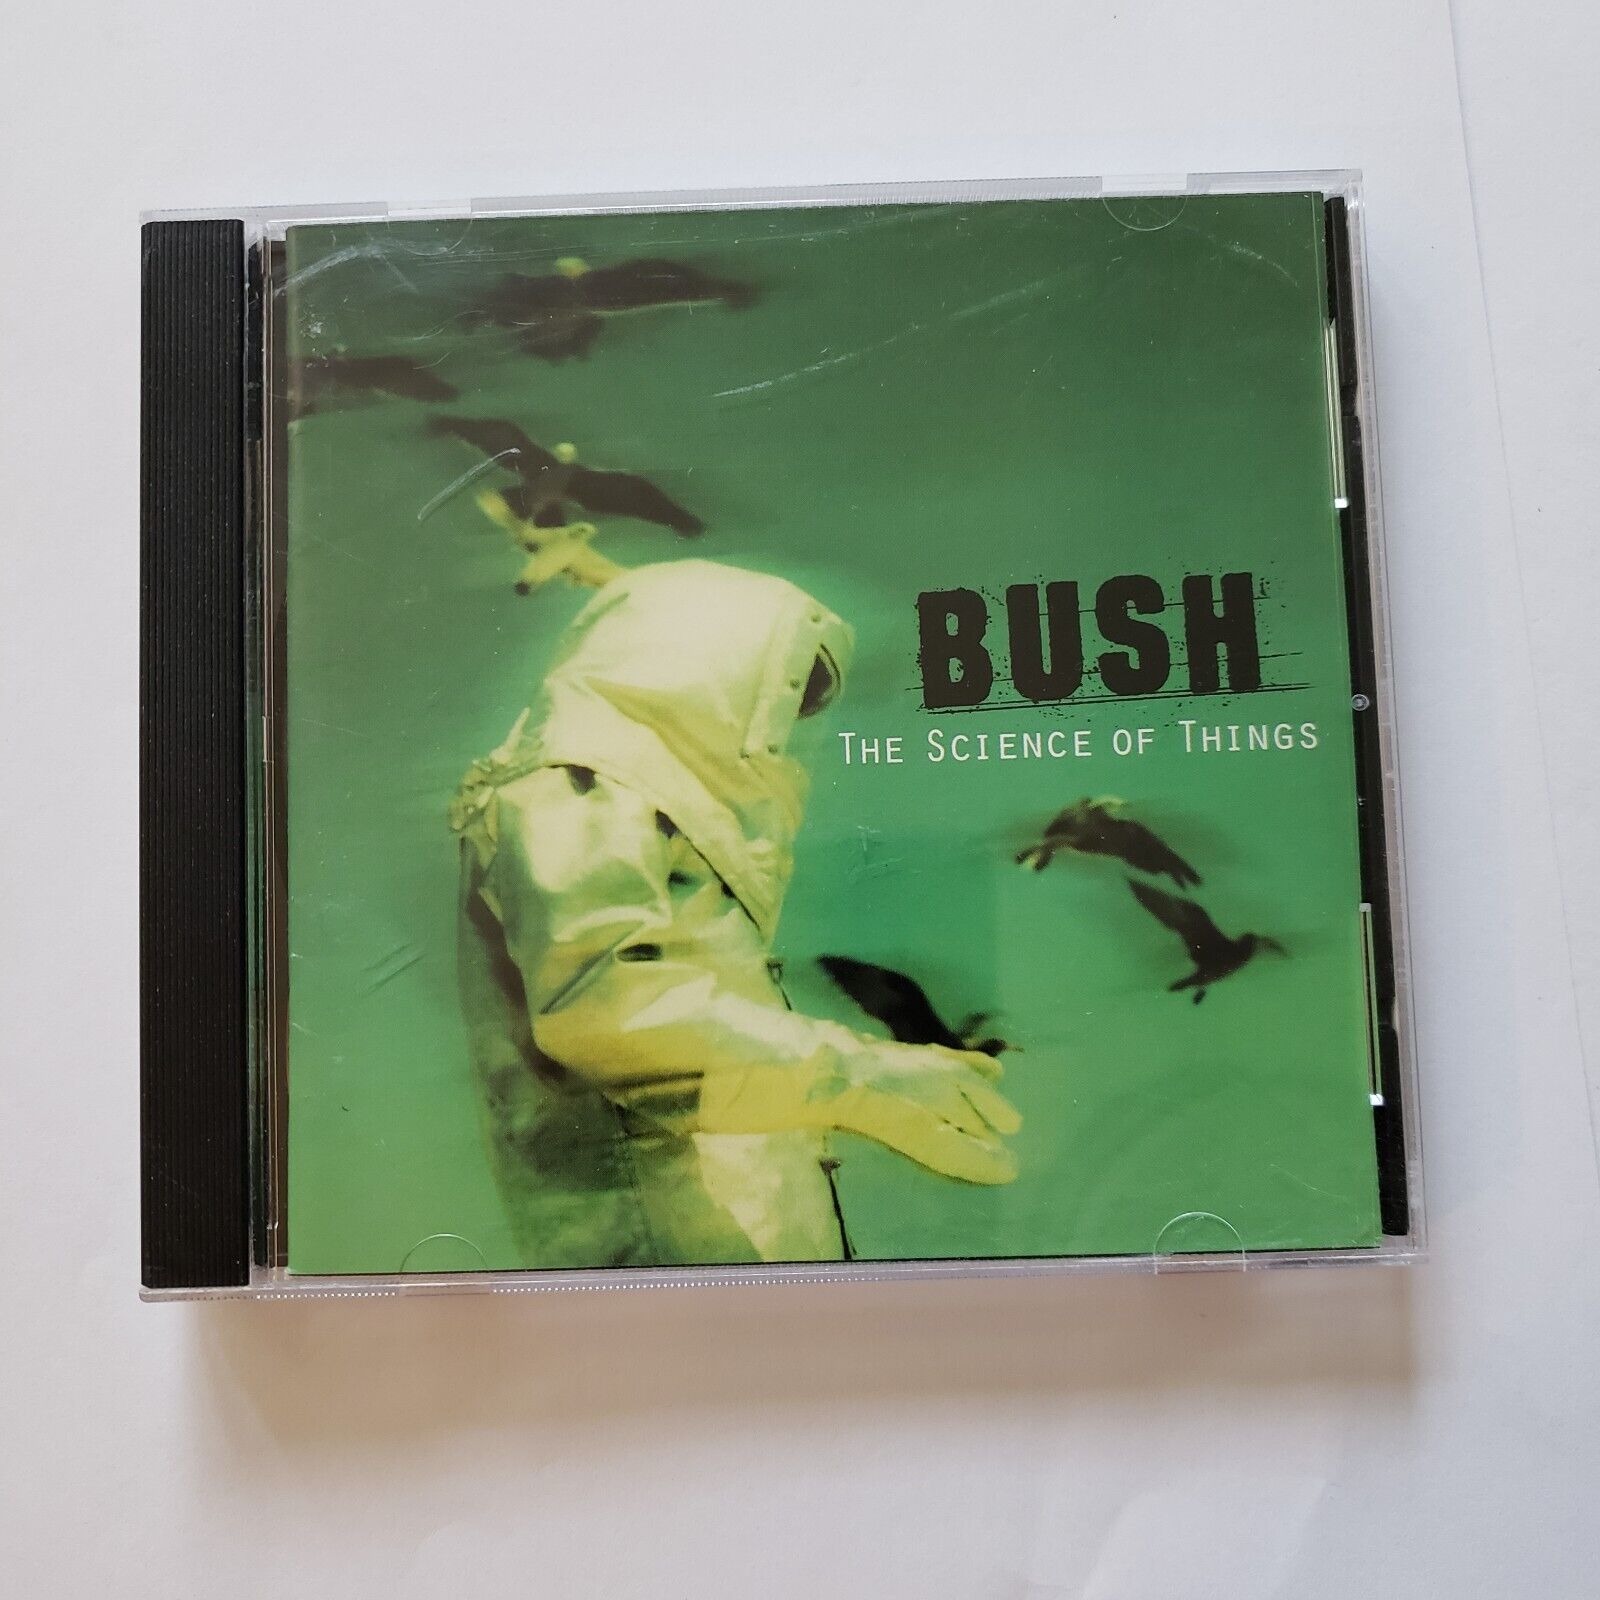 The Science of Things by Bush CD 1999 Interscope Records Warm Machine Pre-owned